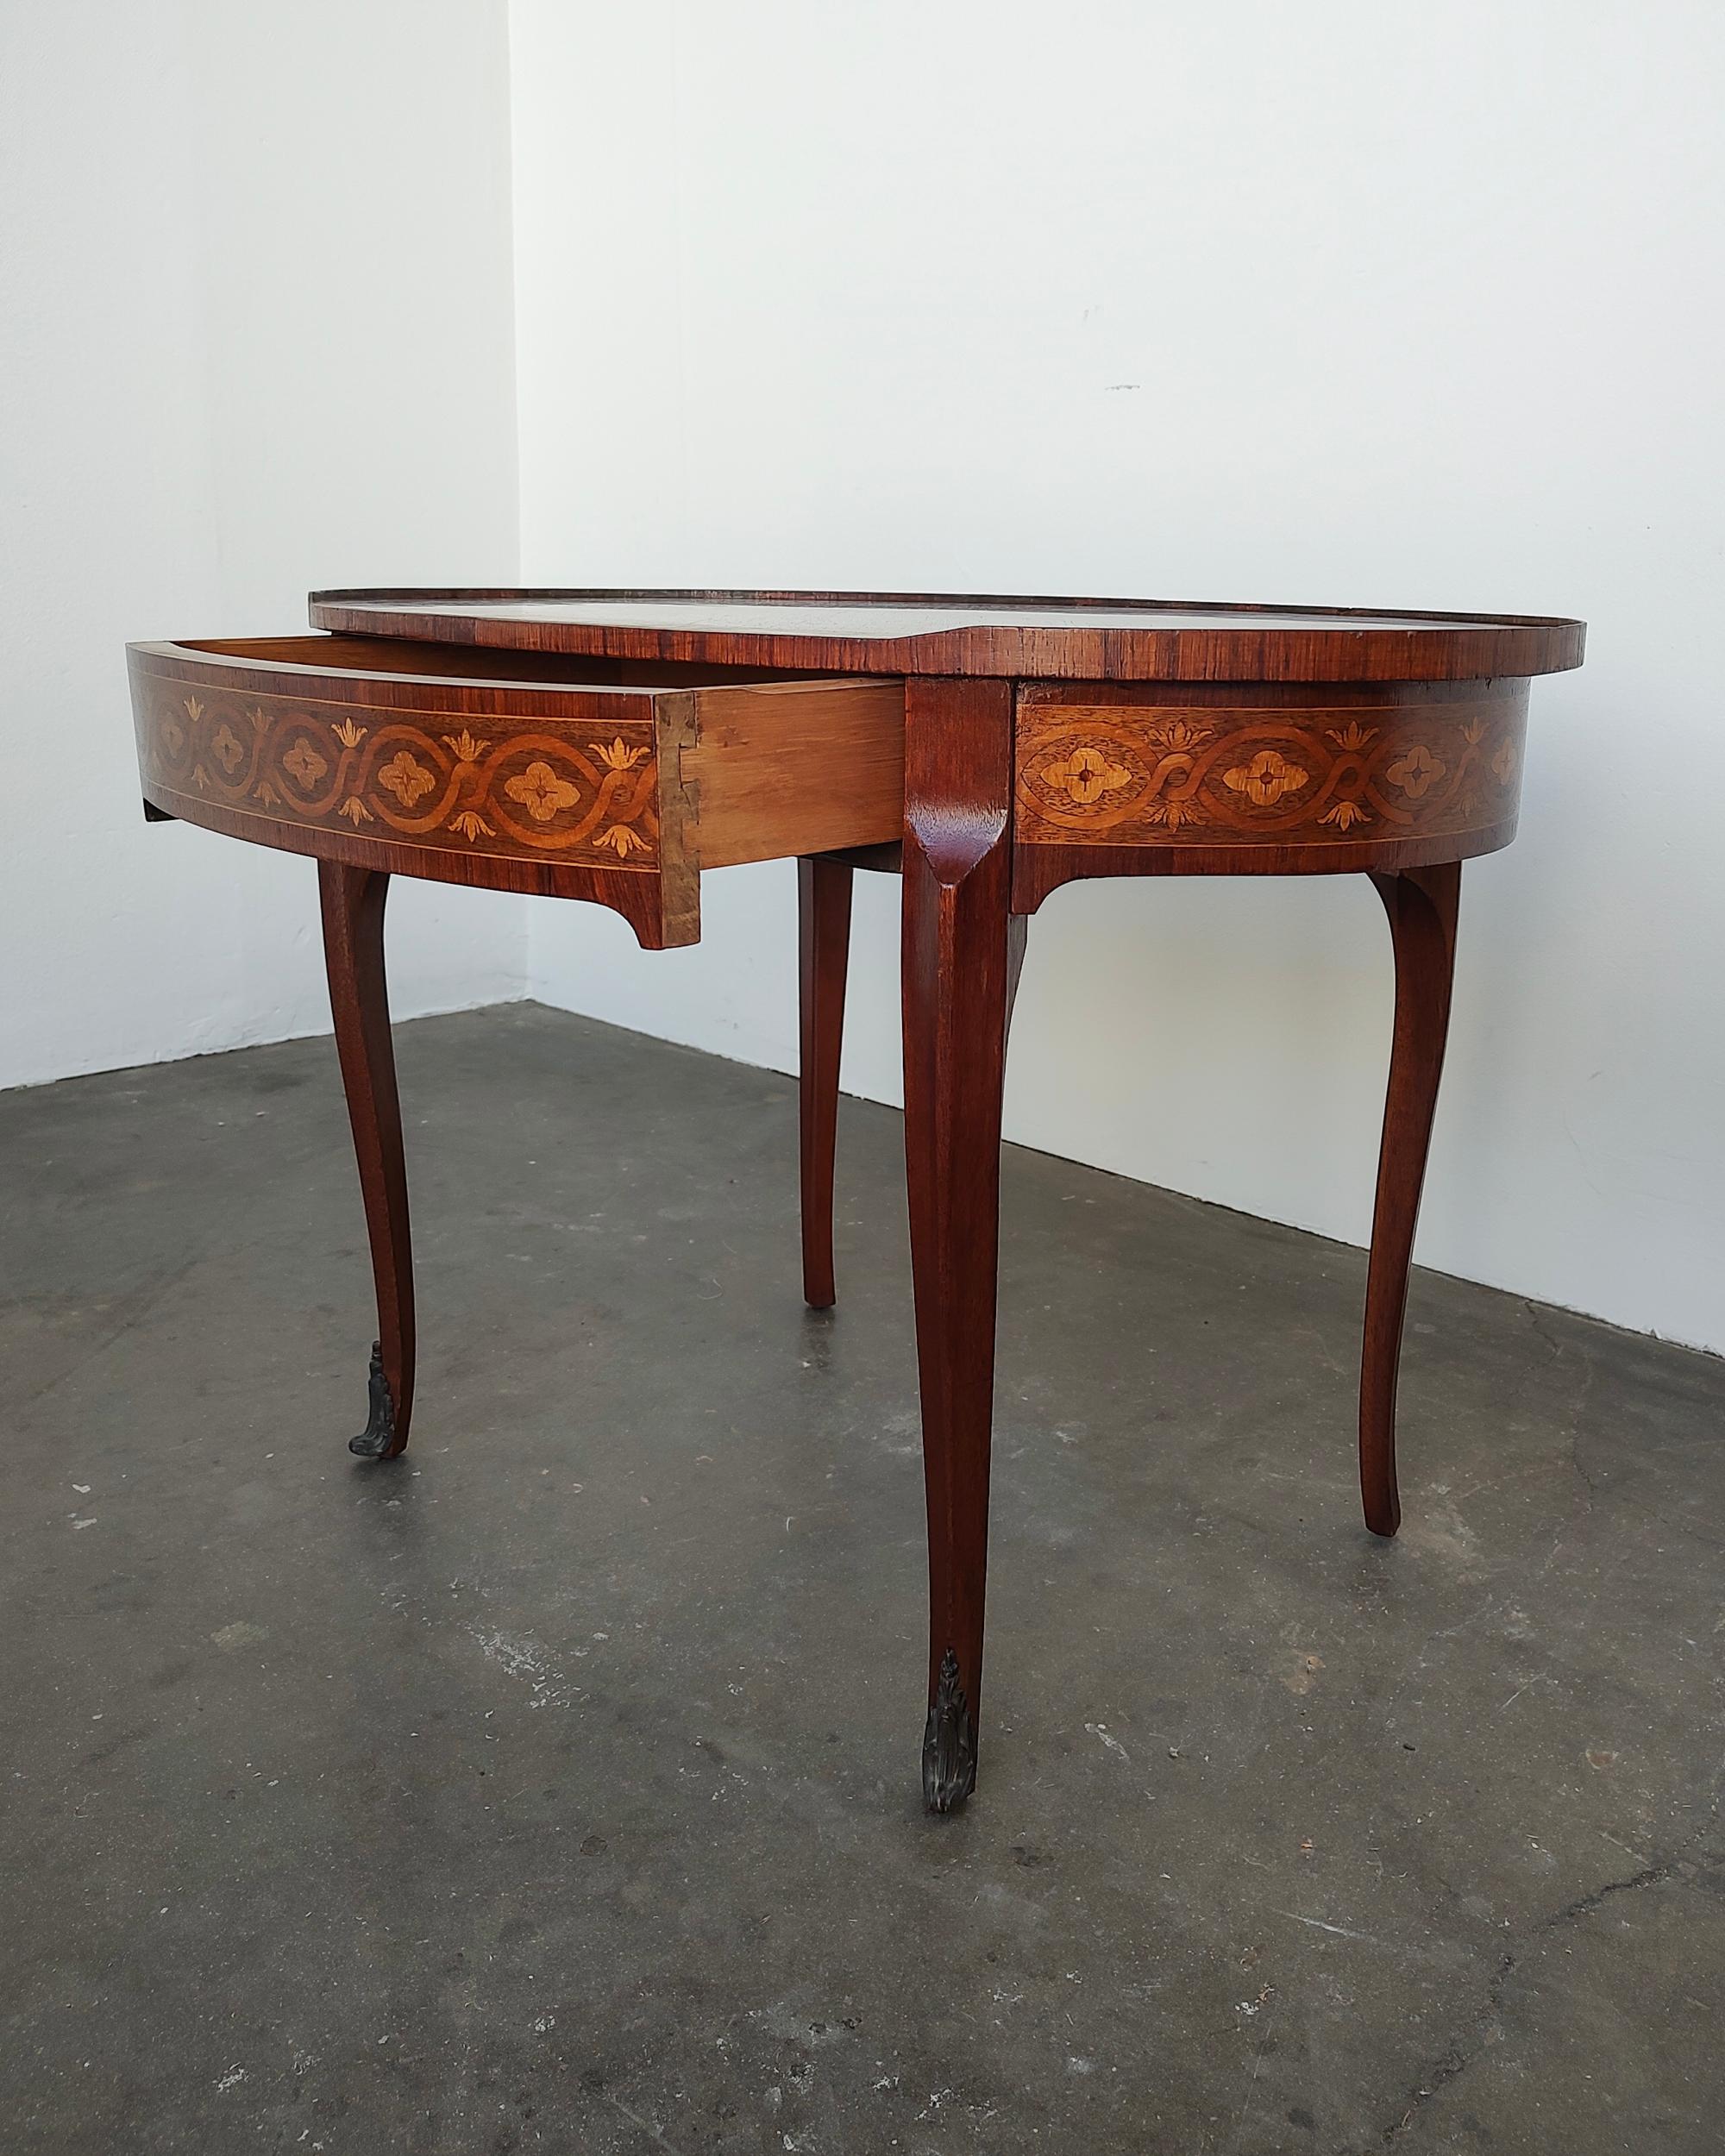 A French Louis XVI mahogany oval side table with hidden drawer and starburst veneer top. top with a trellis motif around the skirt. with inlaid side table with a wooden gallery, single central drawer with two leather inset top candle slides, with